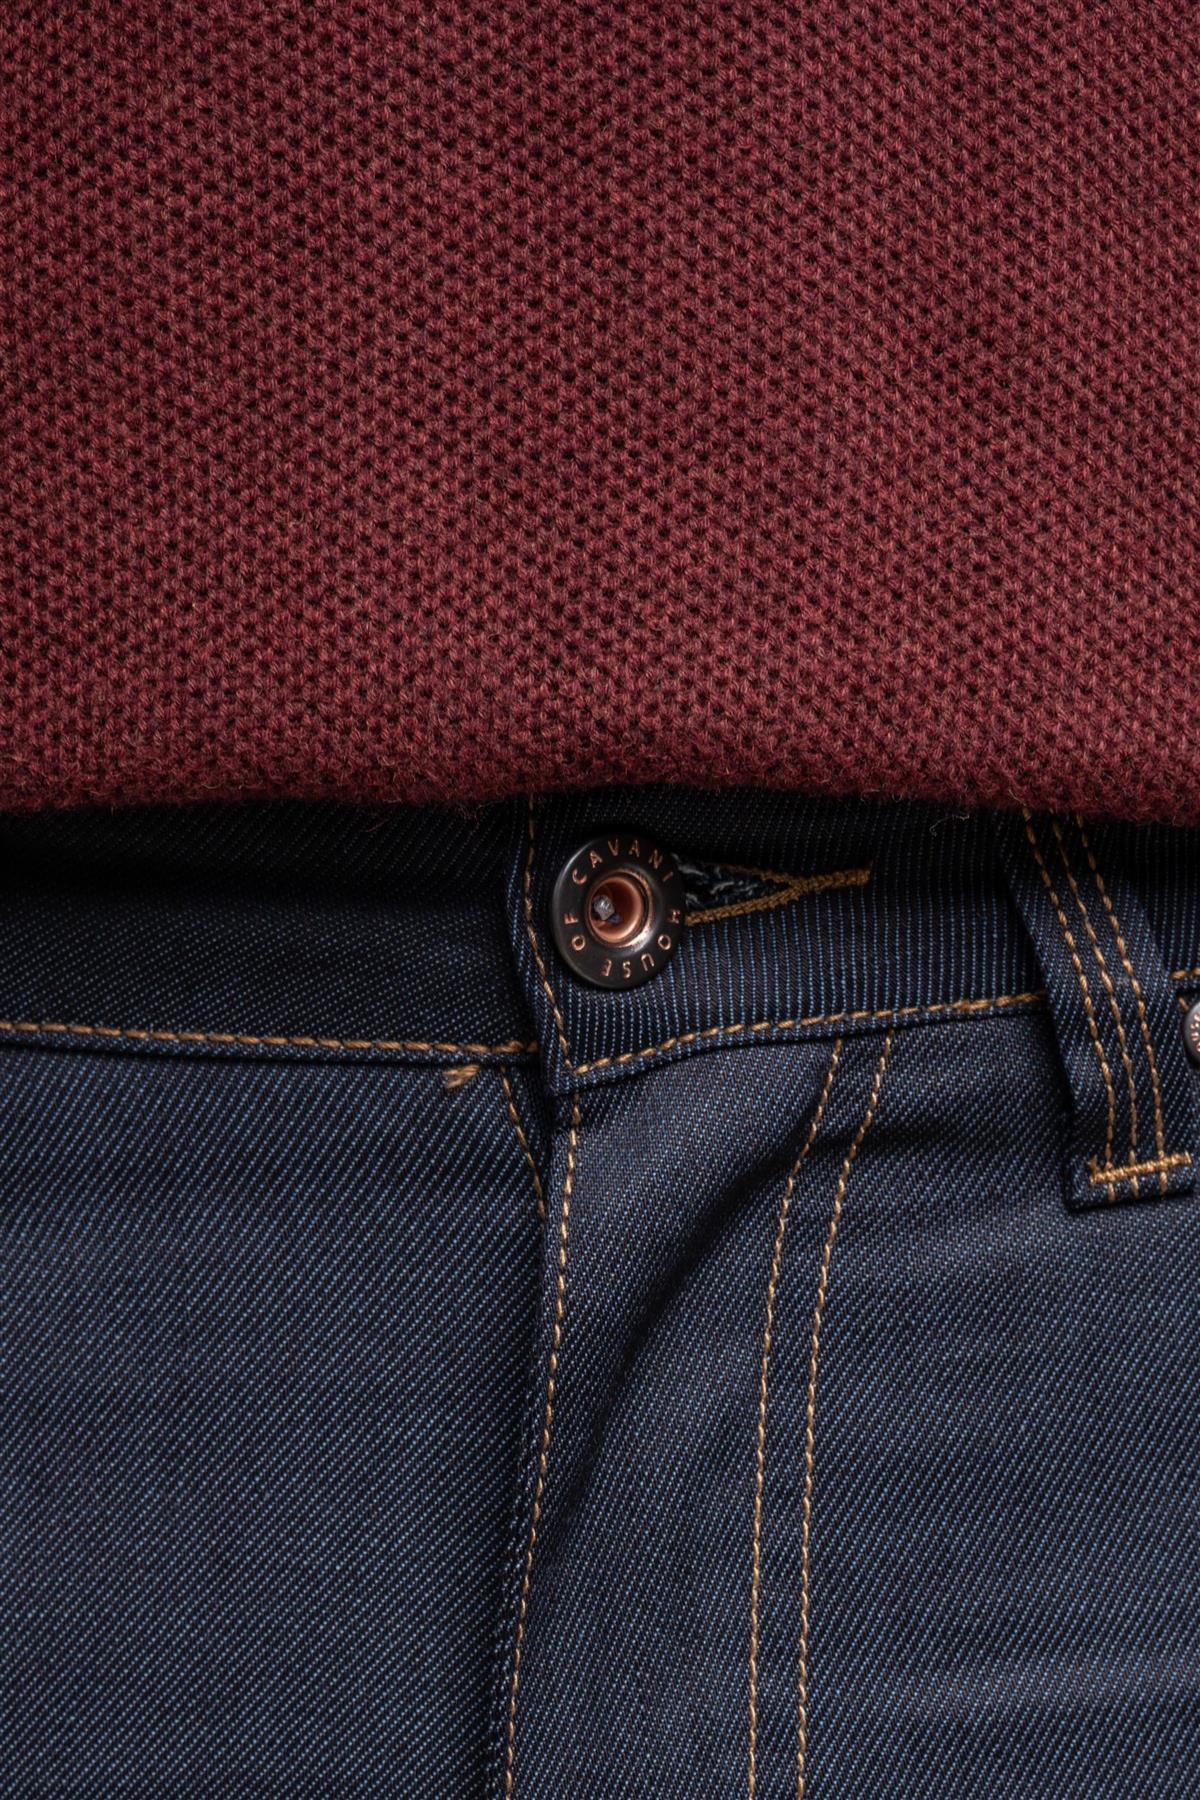 Cole raw jeans front detail